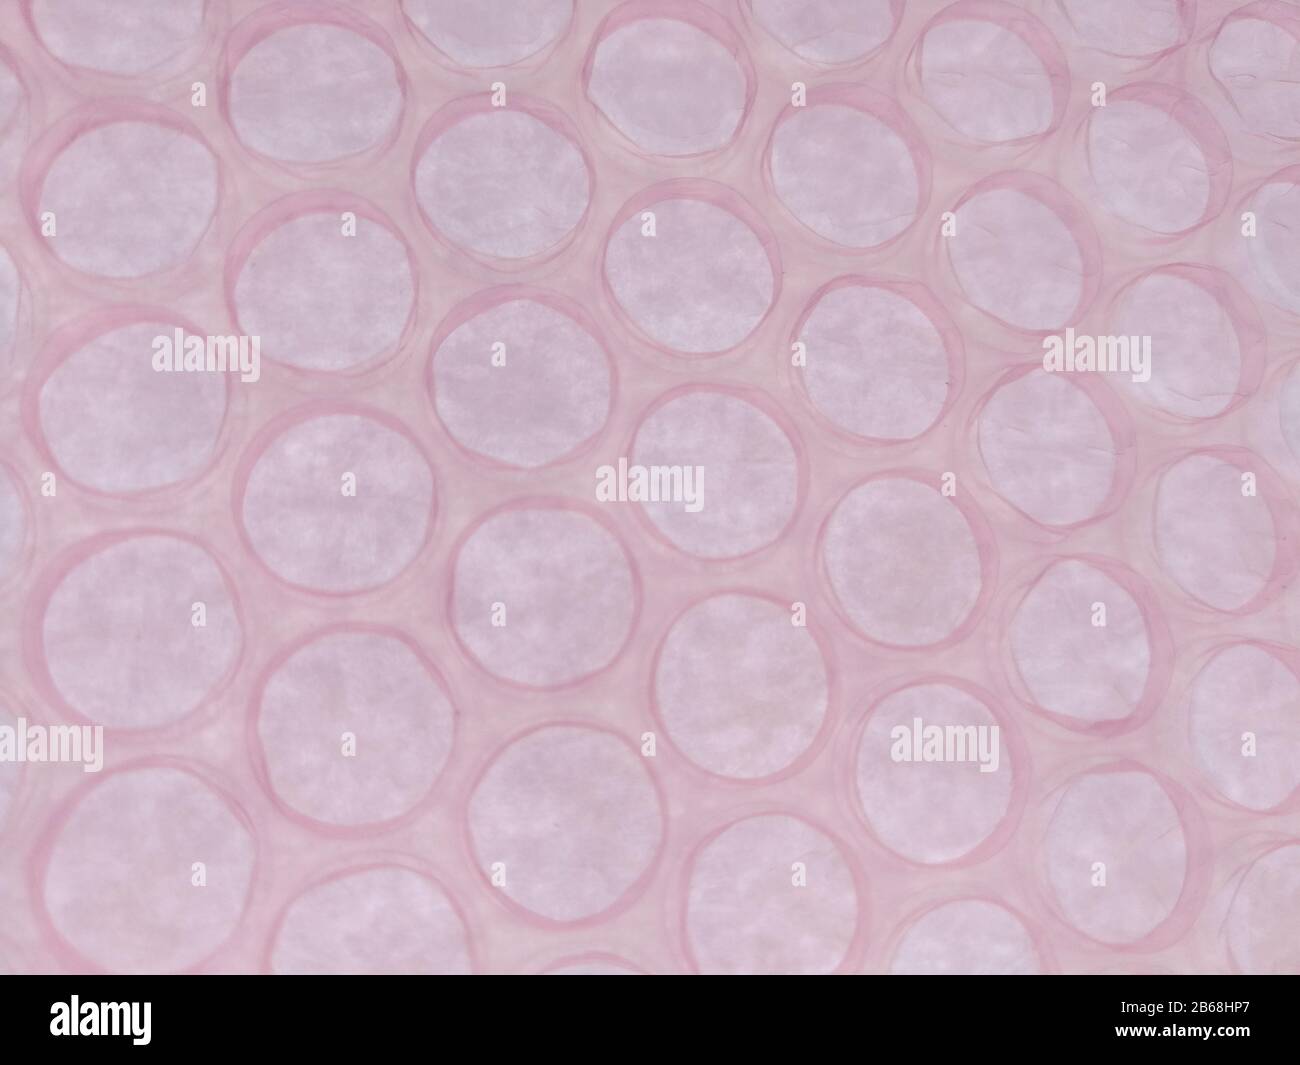 Pink bubble wrap close up for packing fragile things Stock Photo - Alamy